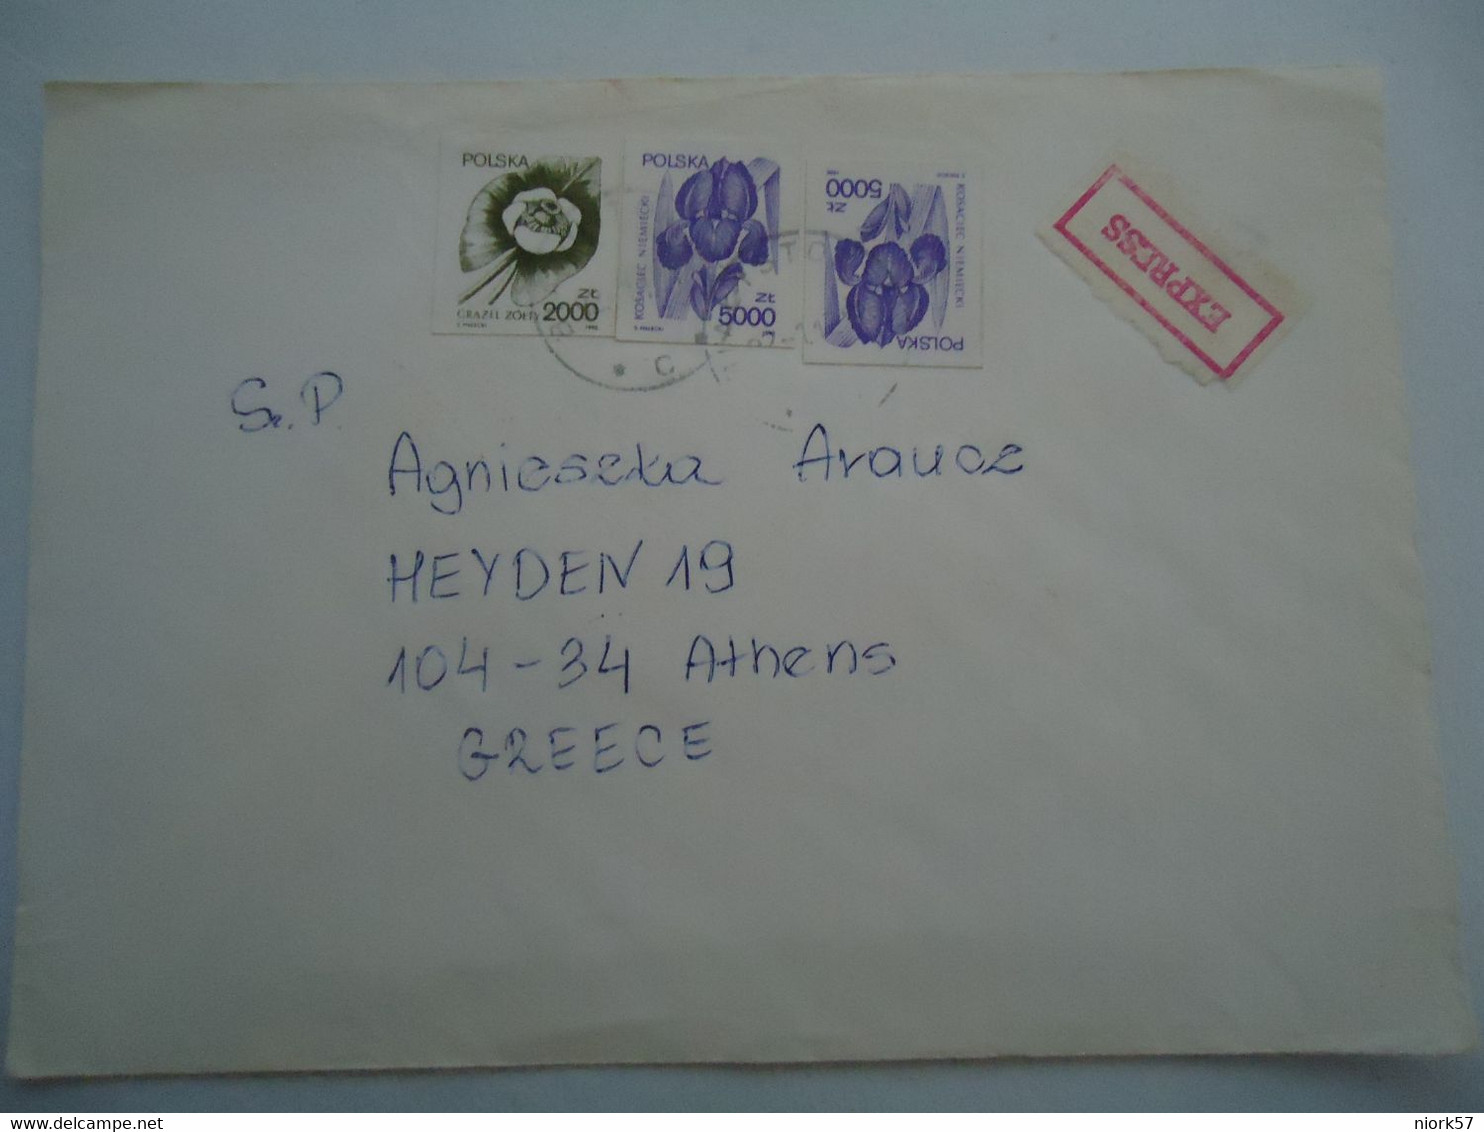 GREECE  POLAND   EXPESS COVER  FLOWERS  USED   POSTMARK  BIAKYSTOA   AND EXPRES ATHENS - Postembleem & Poststempel